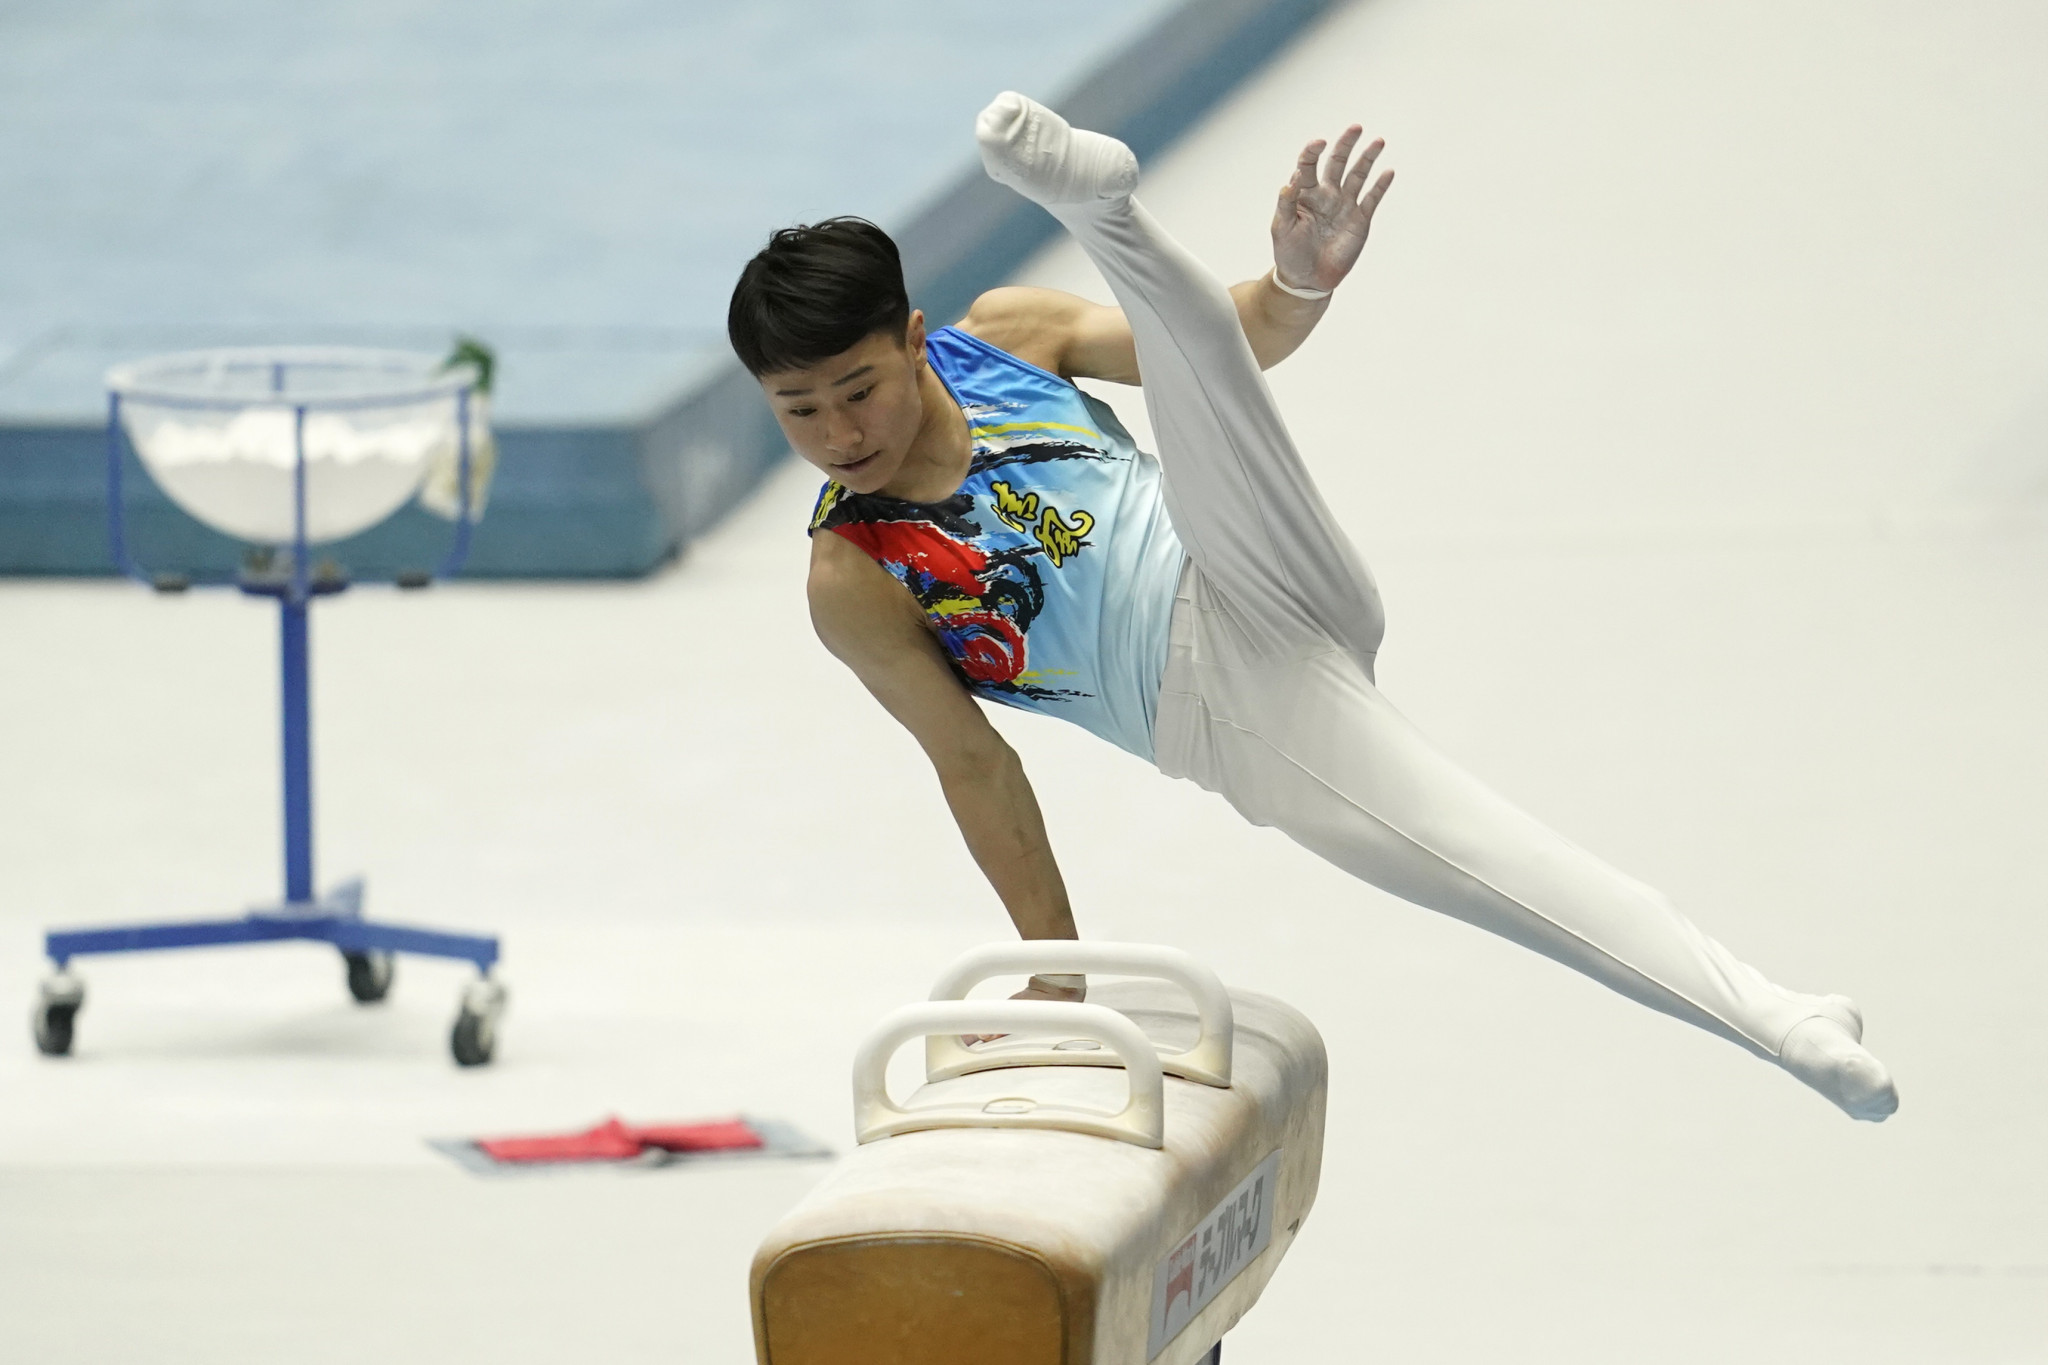 Gold medals shared five ways on first day of apparatus finals at Artistic Gymnastics Junior World Championships